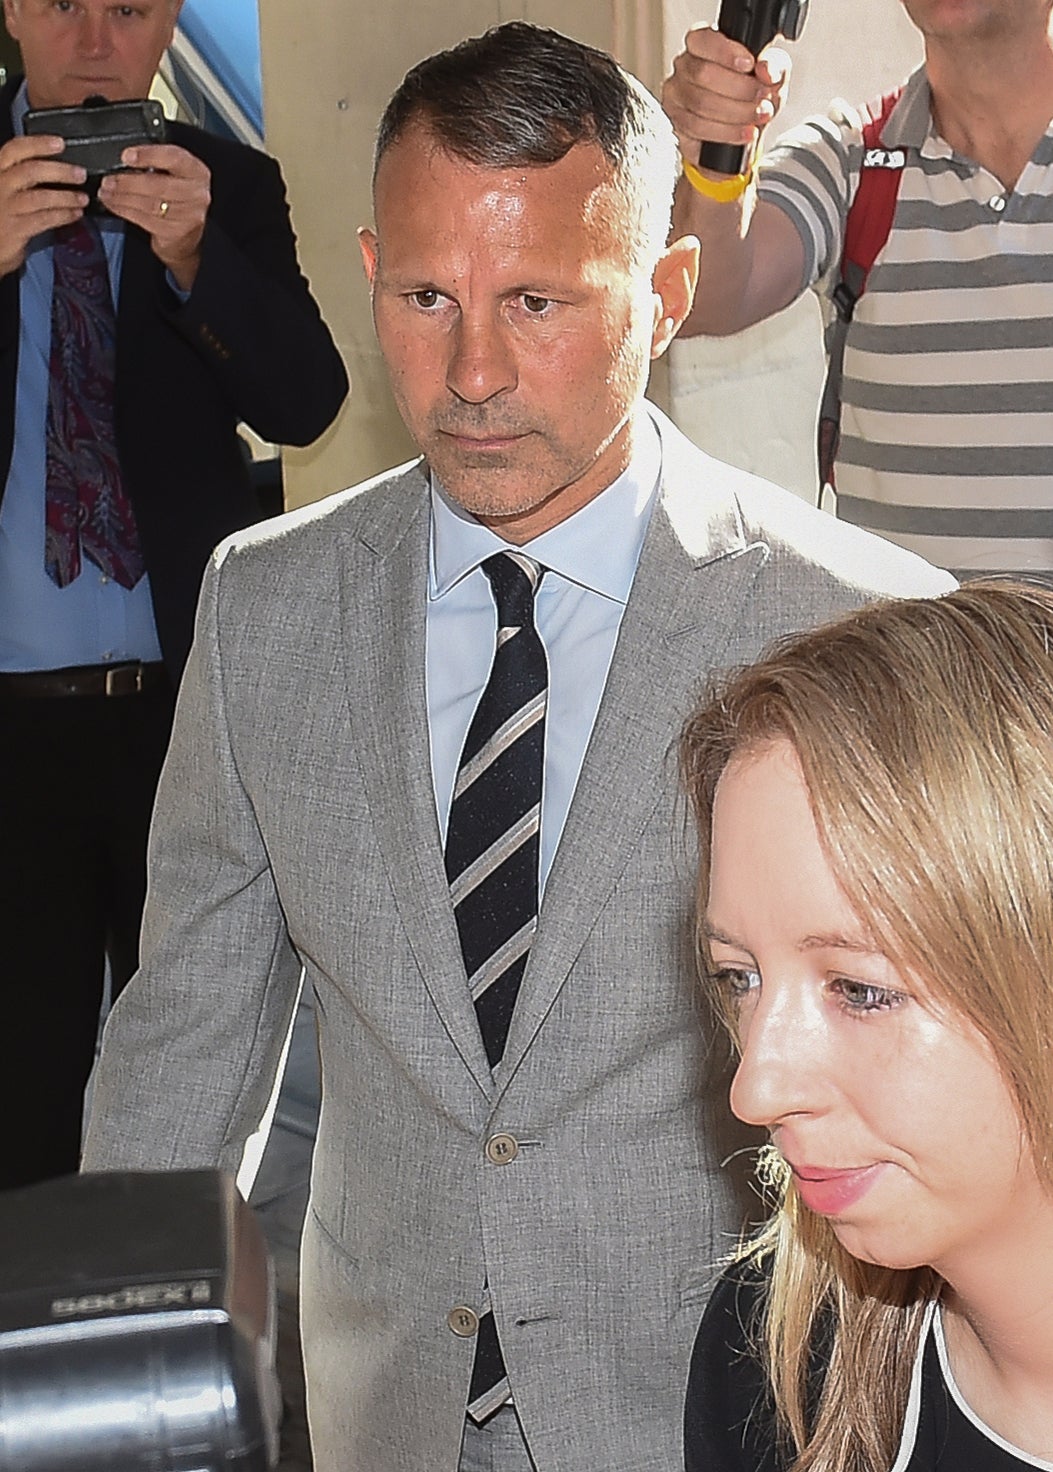 Former Manchester United footballer Ryan Giggs arriving at Manchester Crown Court (Peter Powell/PA)